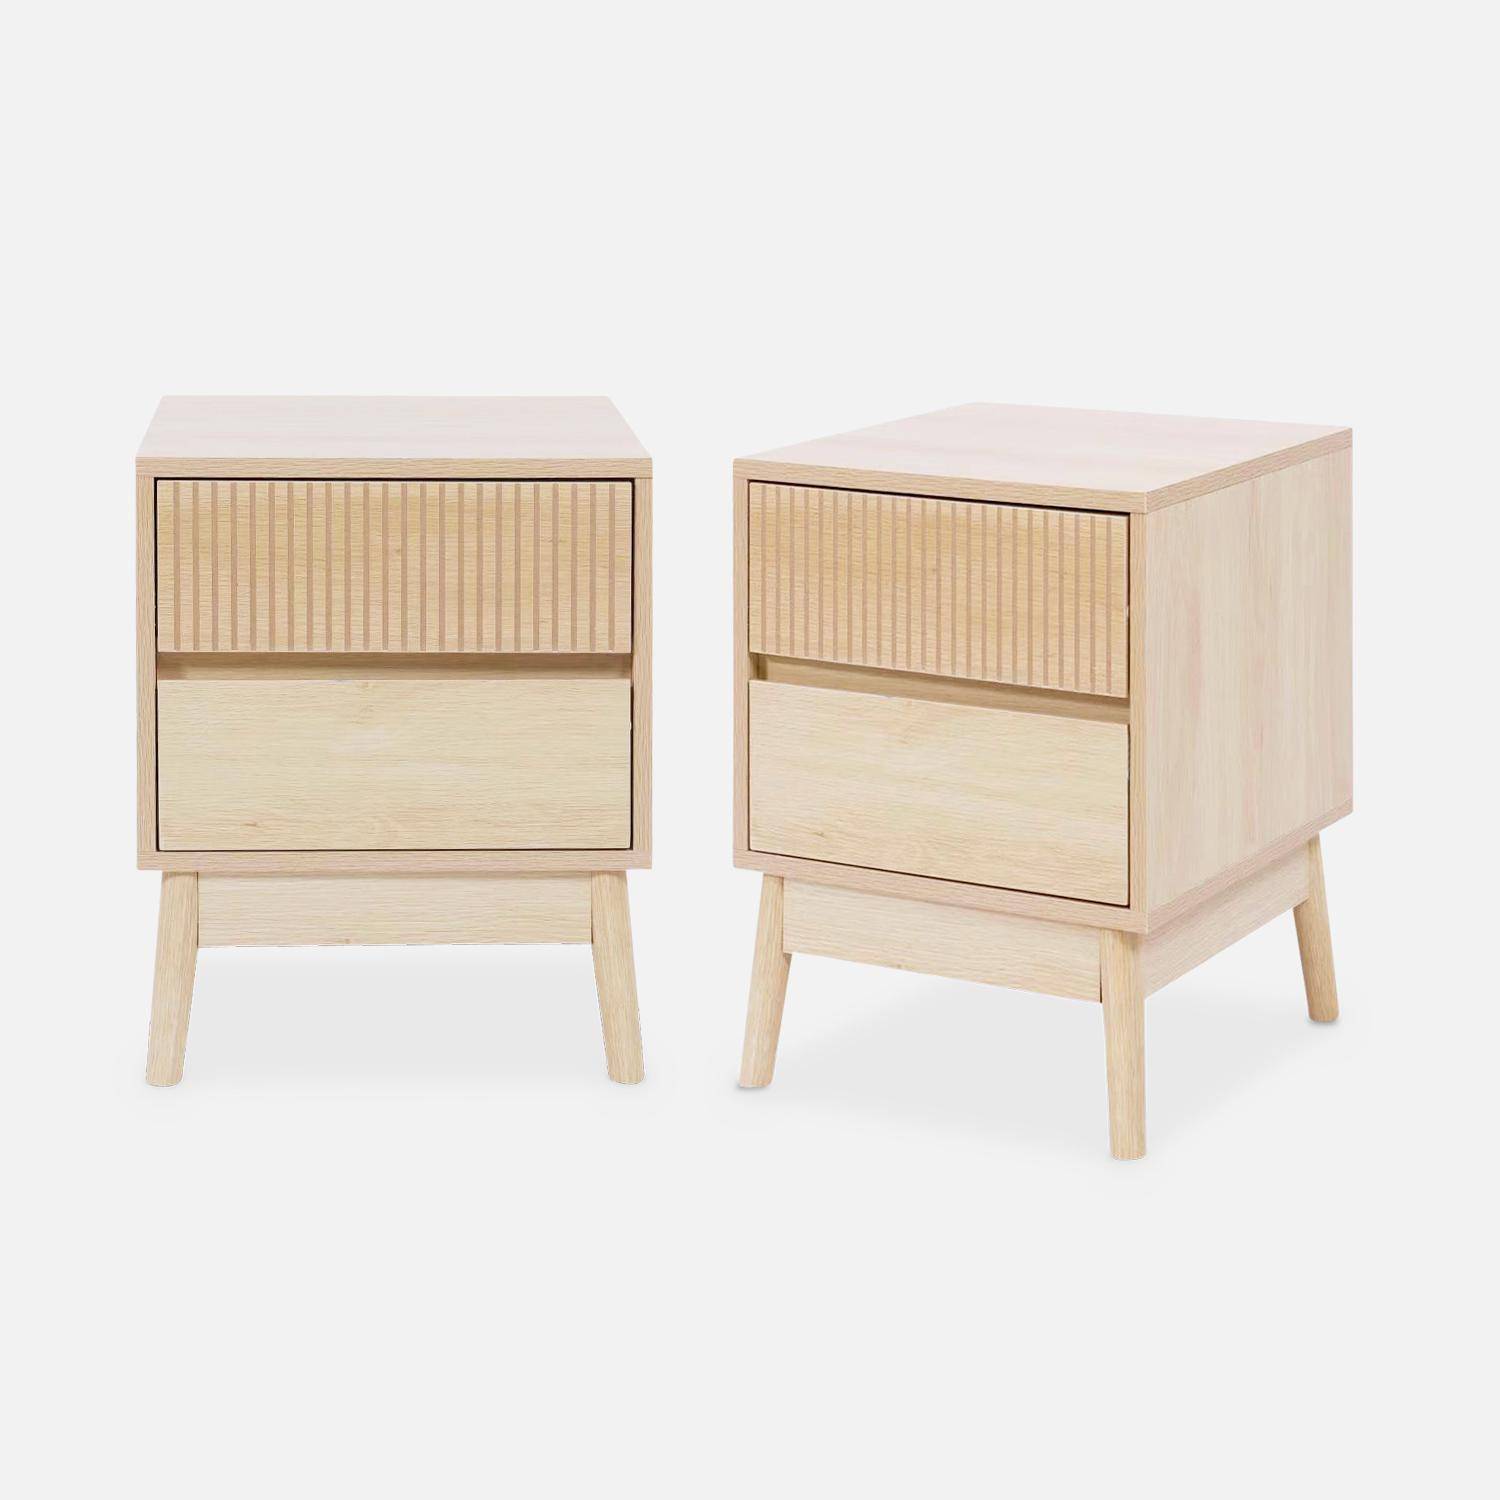 Pair of grooved wooden bedside tables with 2 drawers, 40x39x48cm - Linear - Natural Wood colour Photo1